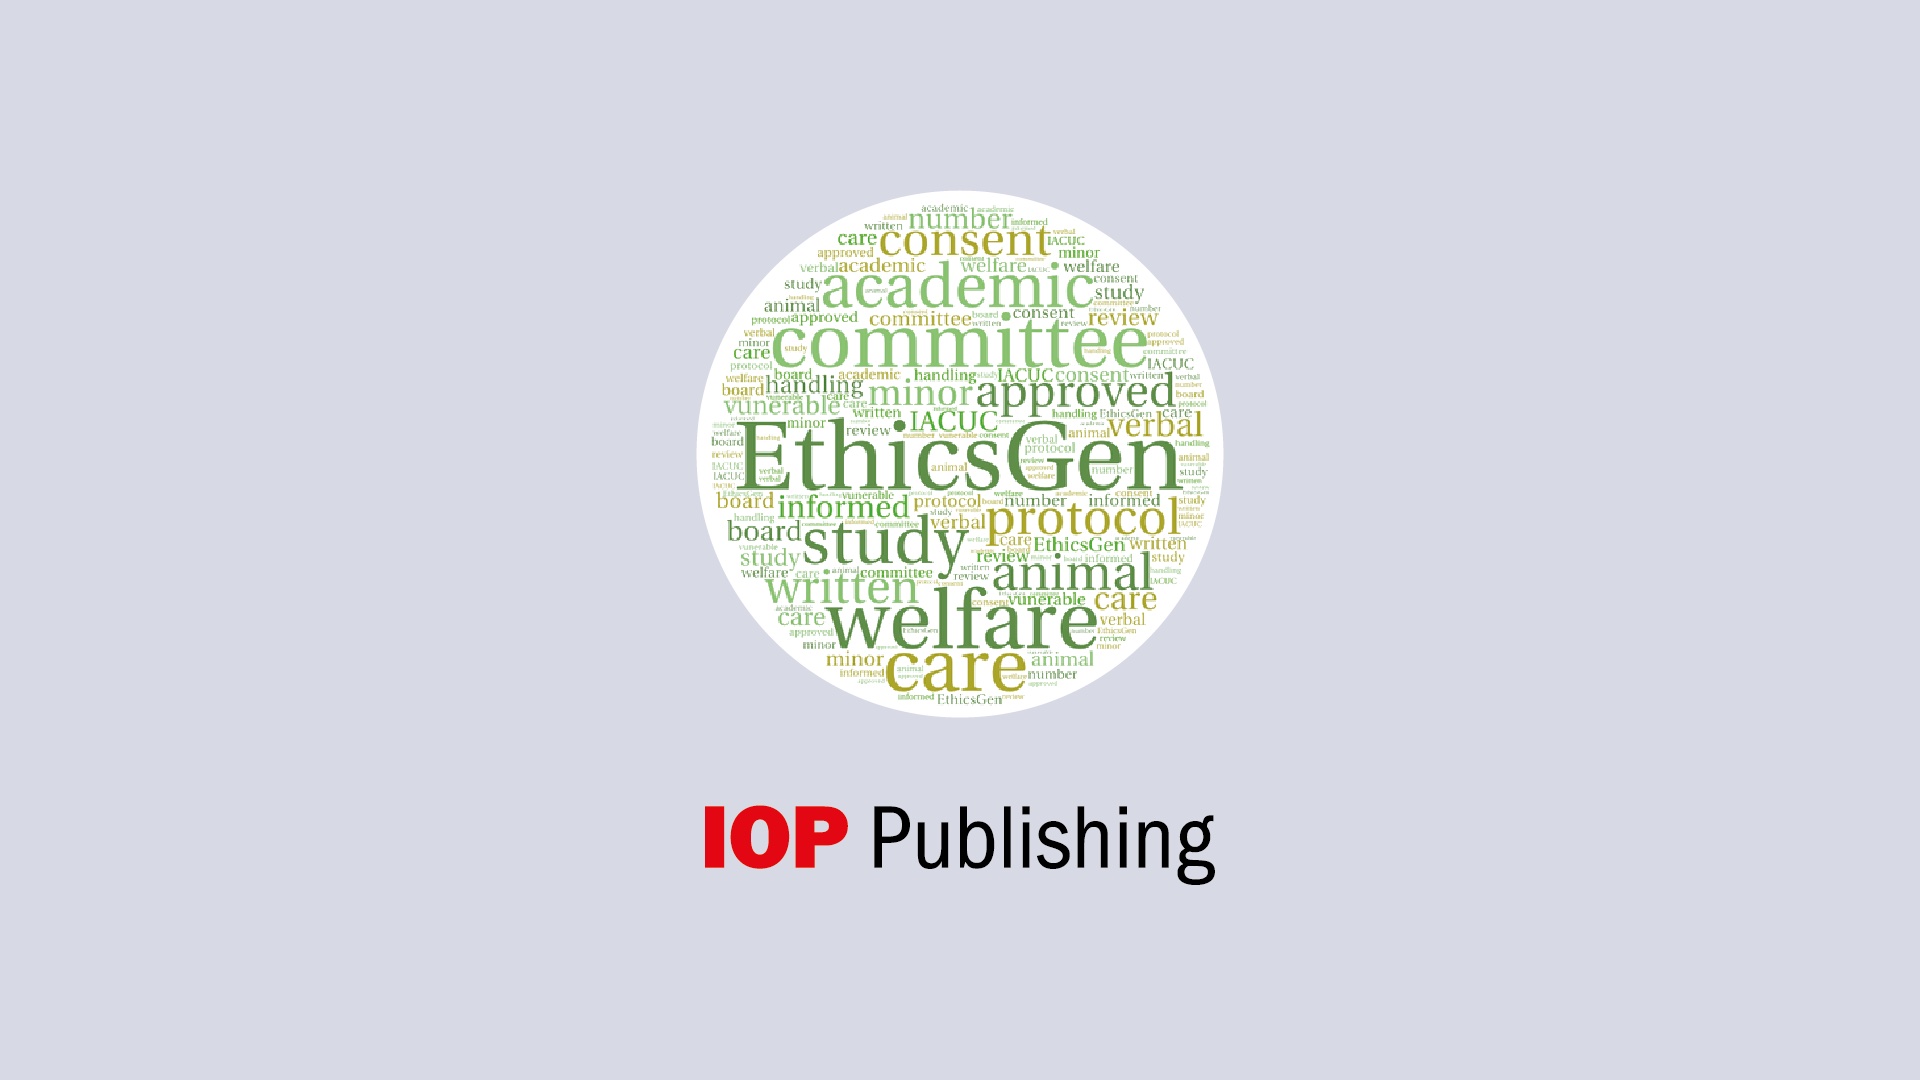 Free trial access to the journals collection of IOP Publishing